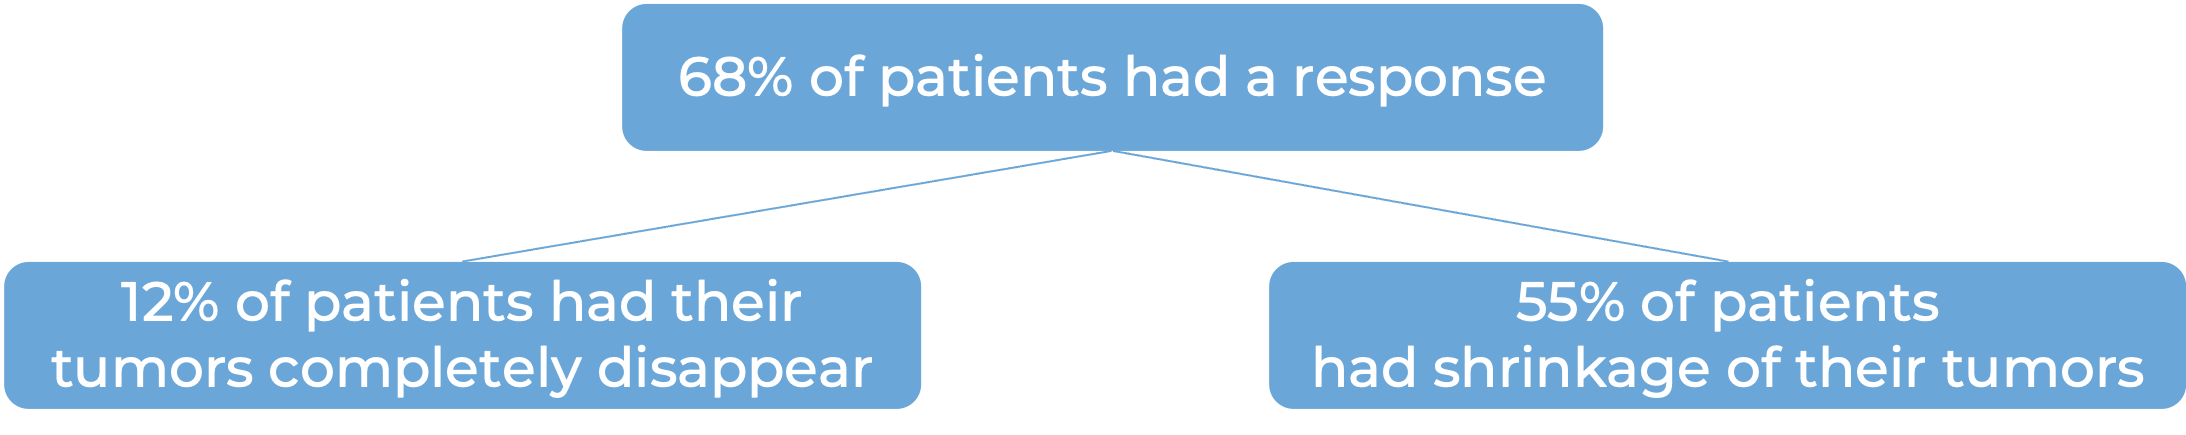 Results after treatment with Padcev (diagram)